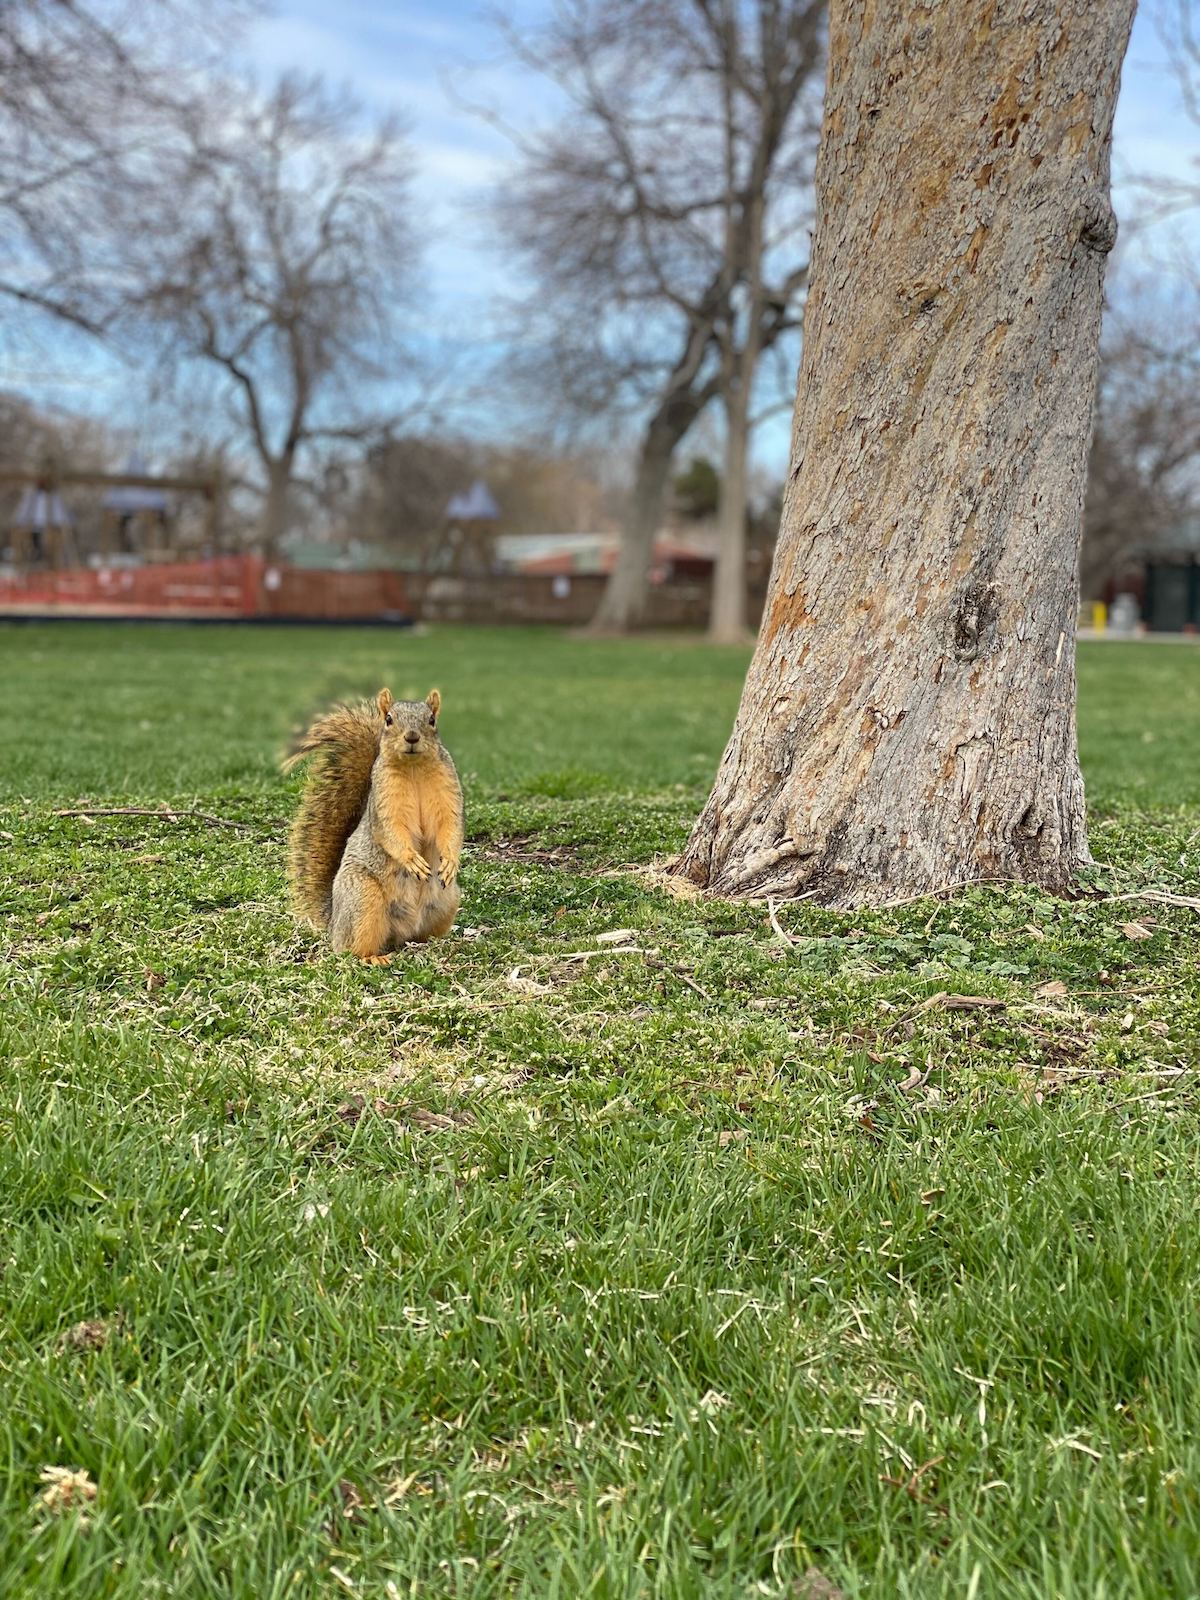 Squirrel Looking at Camera while standing by a tree in a park